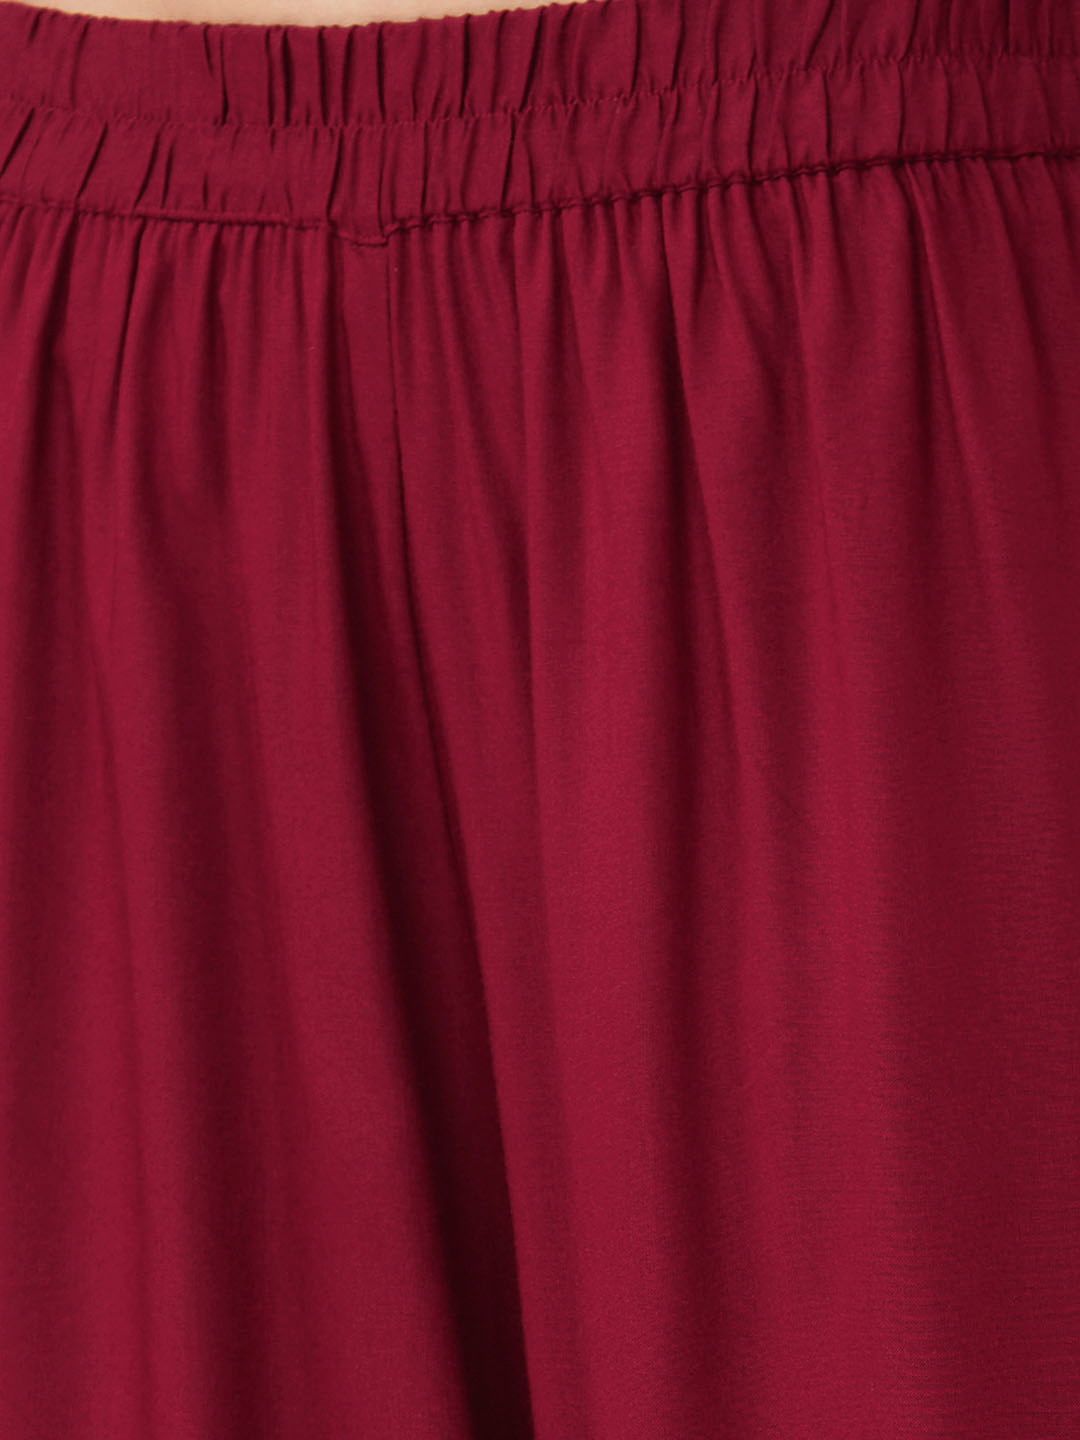 Globus Women Maroon Solid Ethnic Wide Leg Palazzo with Lace at Hem